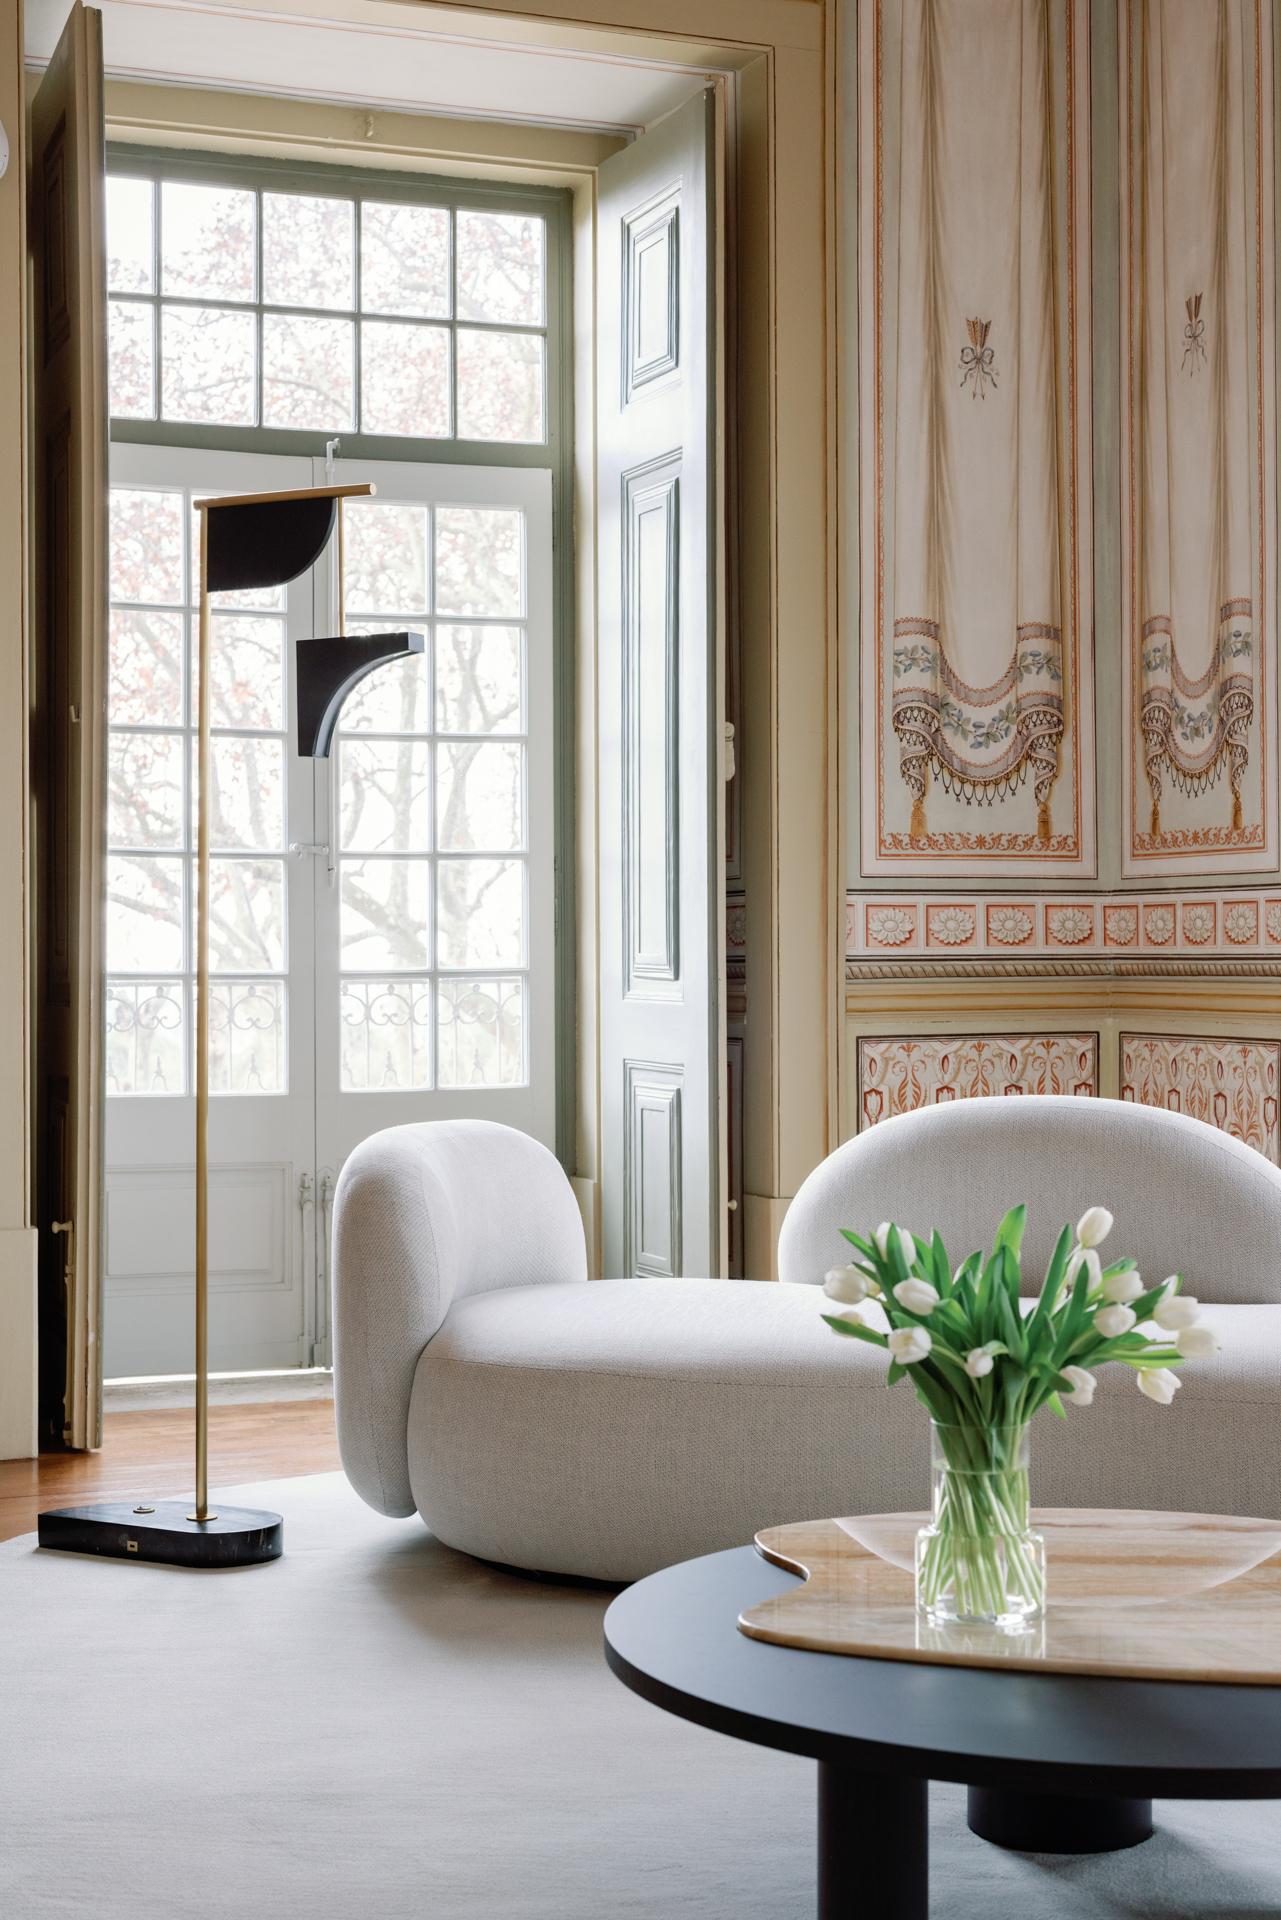 Opposite Floor Lamp, Contemporary Collection, Handcrafted in Portugal - Europe by Greenapple.

The Opposite modern floor lamp brings the creative vision to life through its meticulous design, elevating the atmosphere of the modern home. The warm